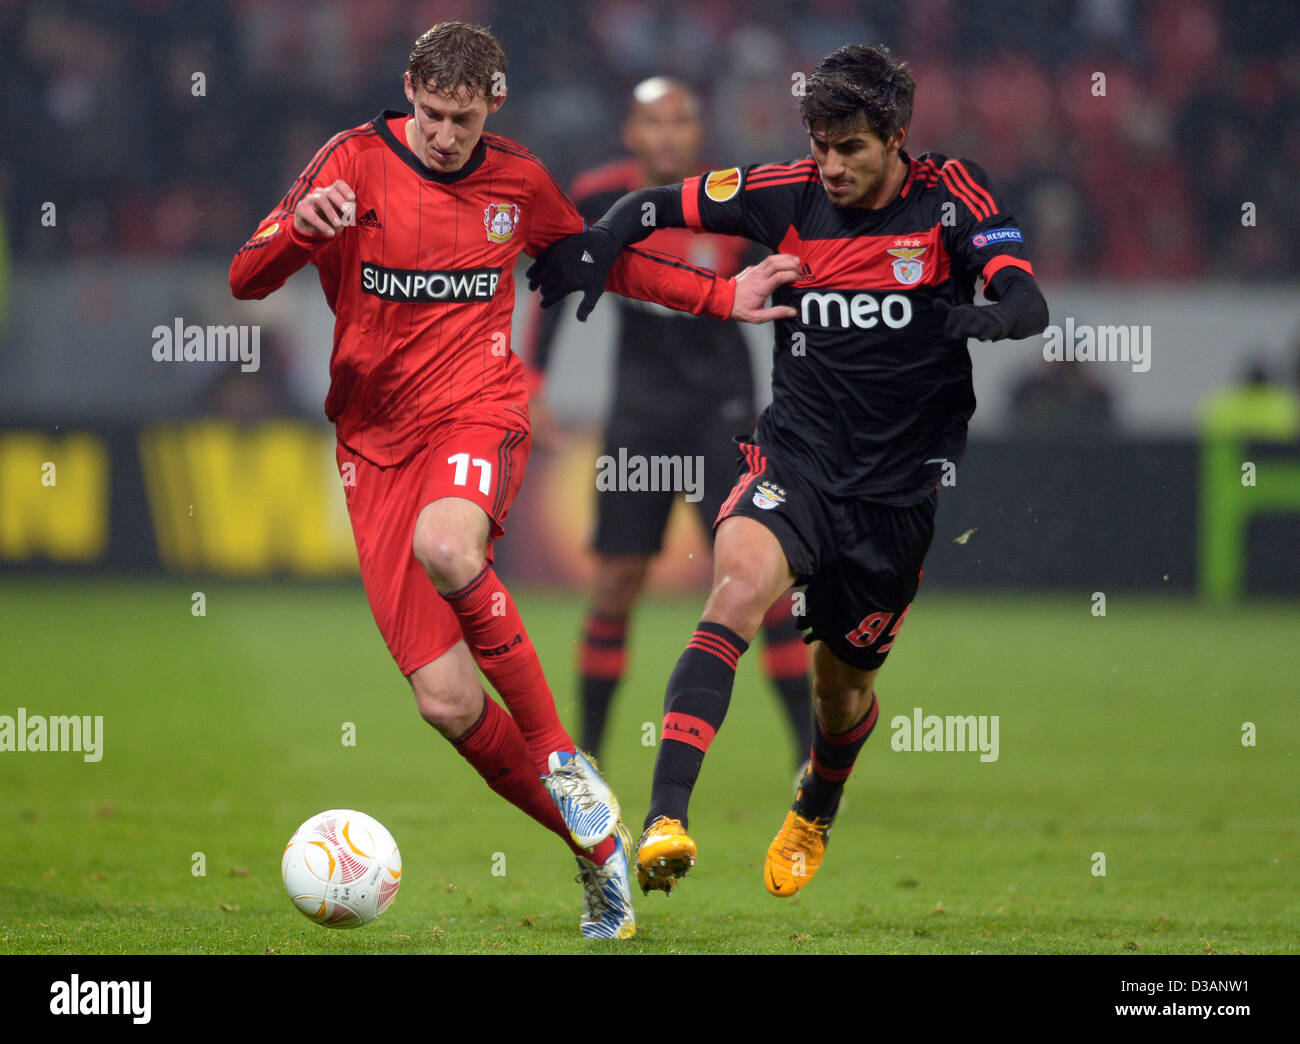 Leverkusen's Stefan Kiessling and Andre Gomes of Benfica vie for the ball during the UEFA Europa League round of 32 first leg soccer match between Bayer Leverkusen and Benfica Lisbon at at BayArena stadium in Leverkusen, Germany, 14 February 2013. Photo: Federico Gambarini/dpa Stock Photo